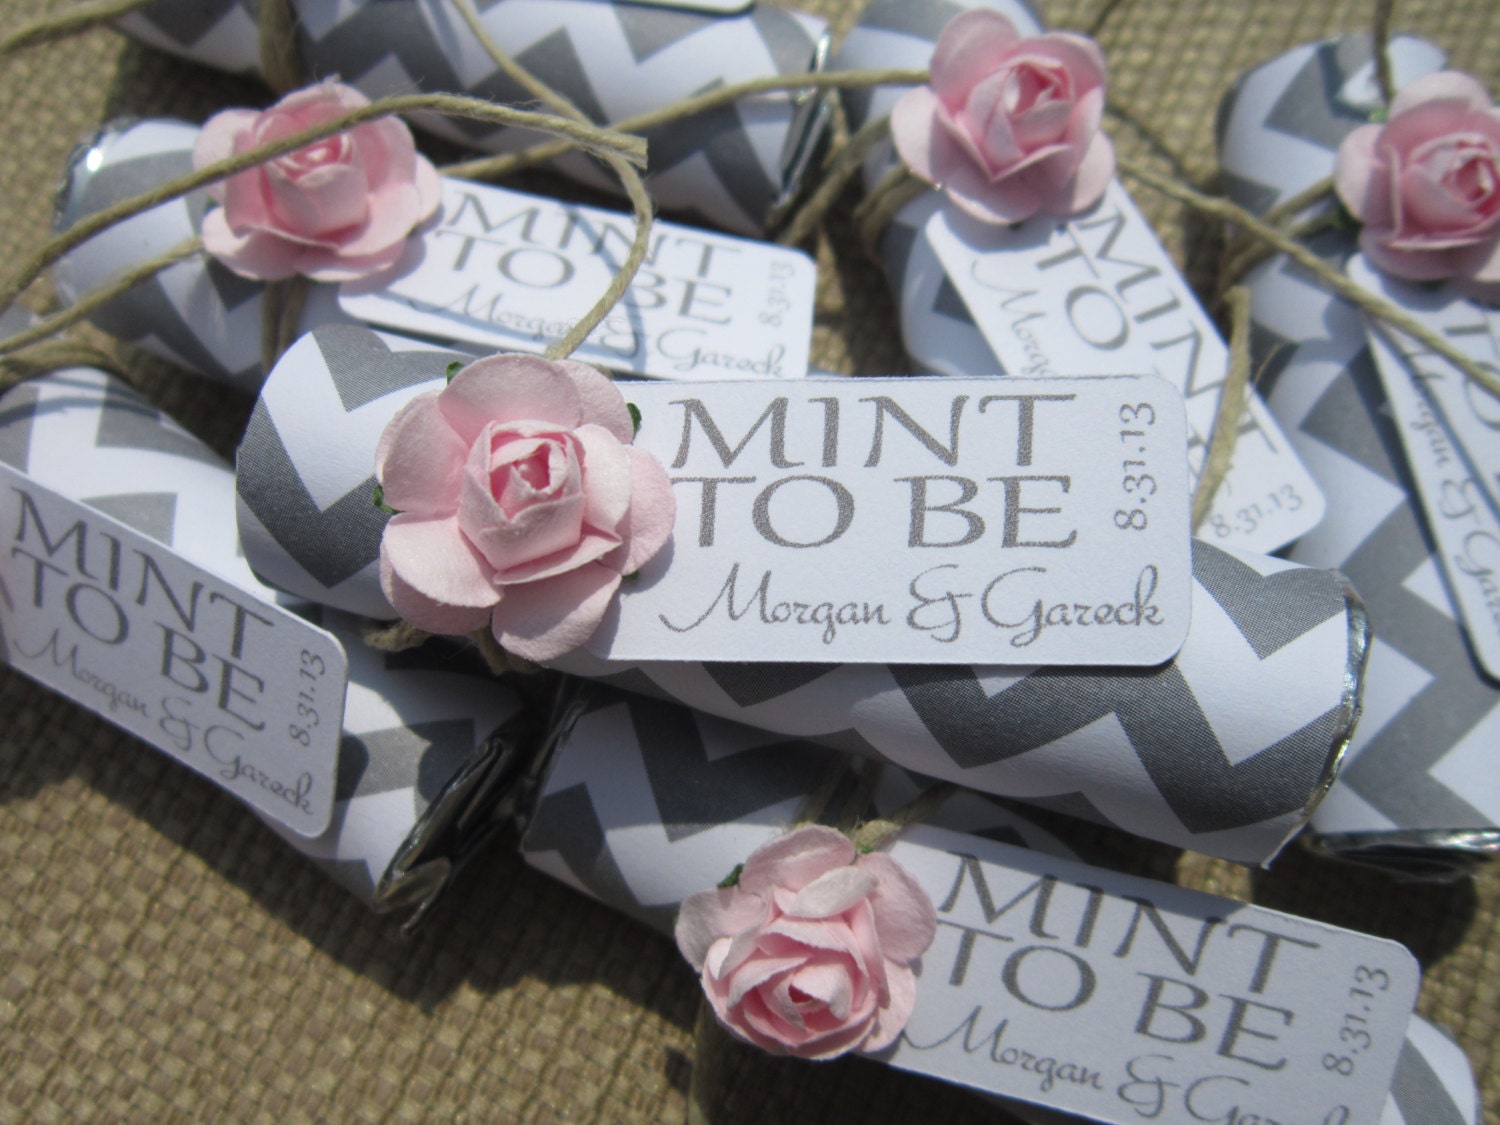 Bridal shower wedding favor - "Mint to be" favors with personalized tag